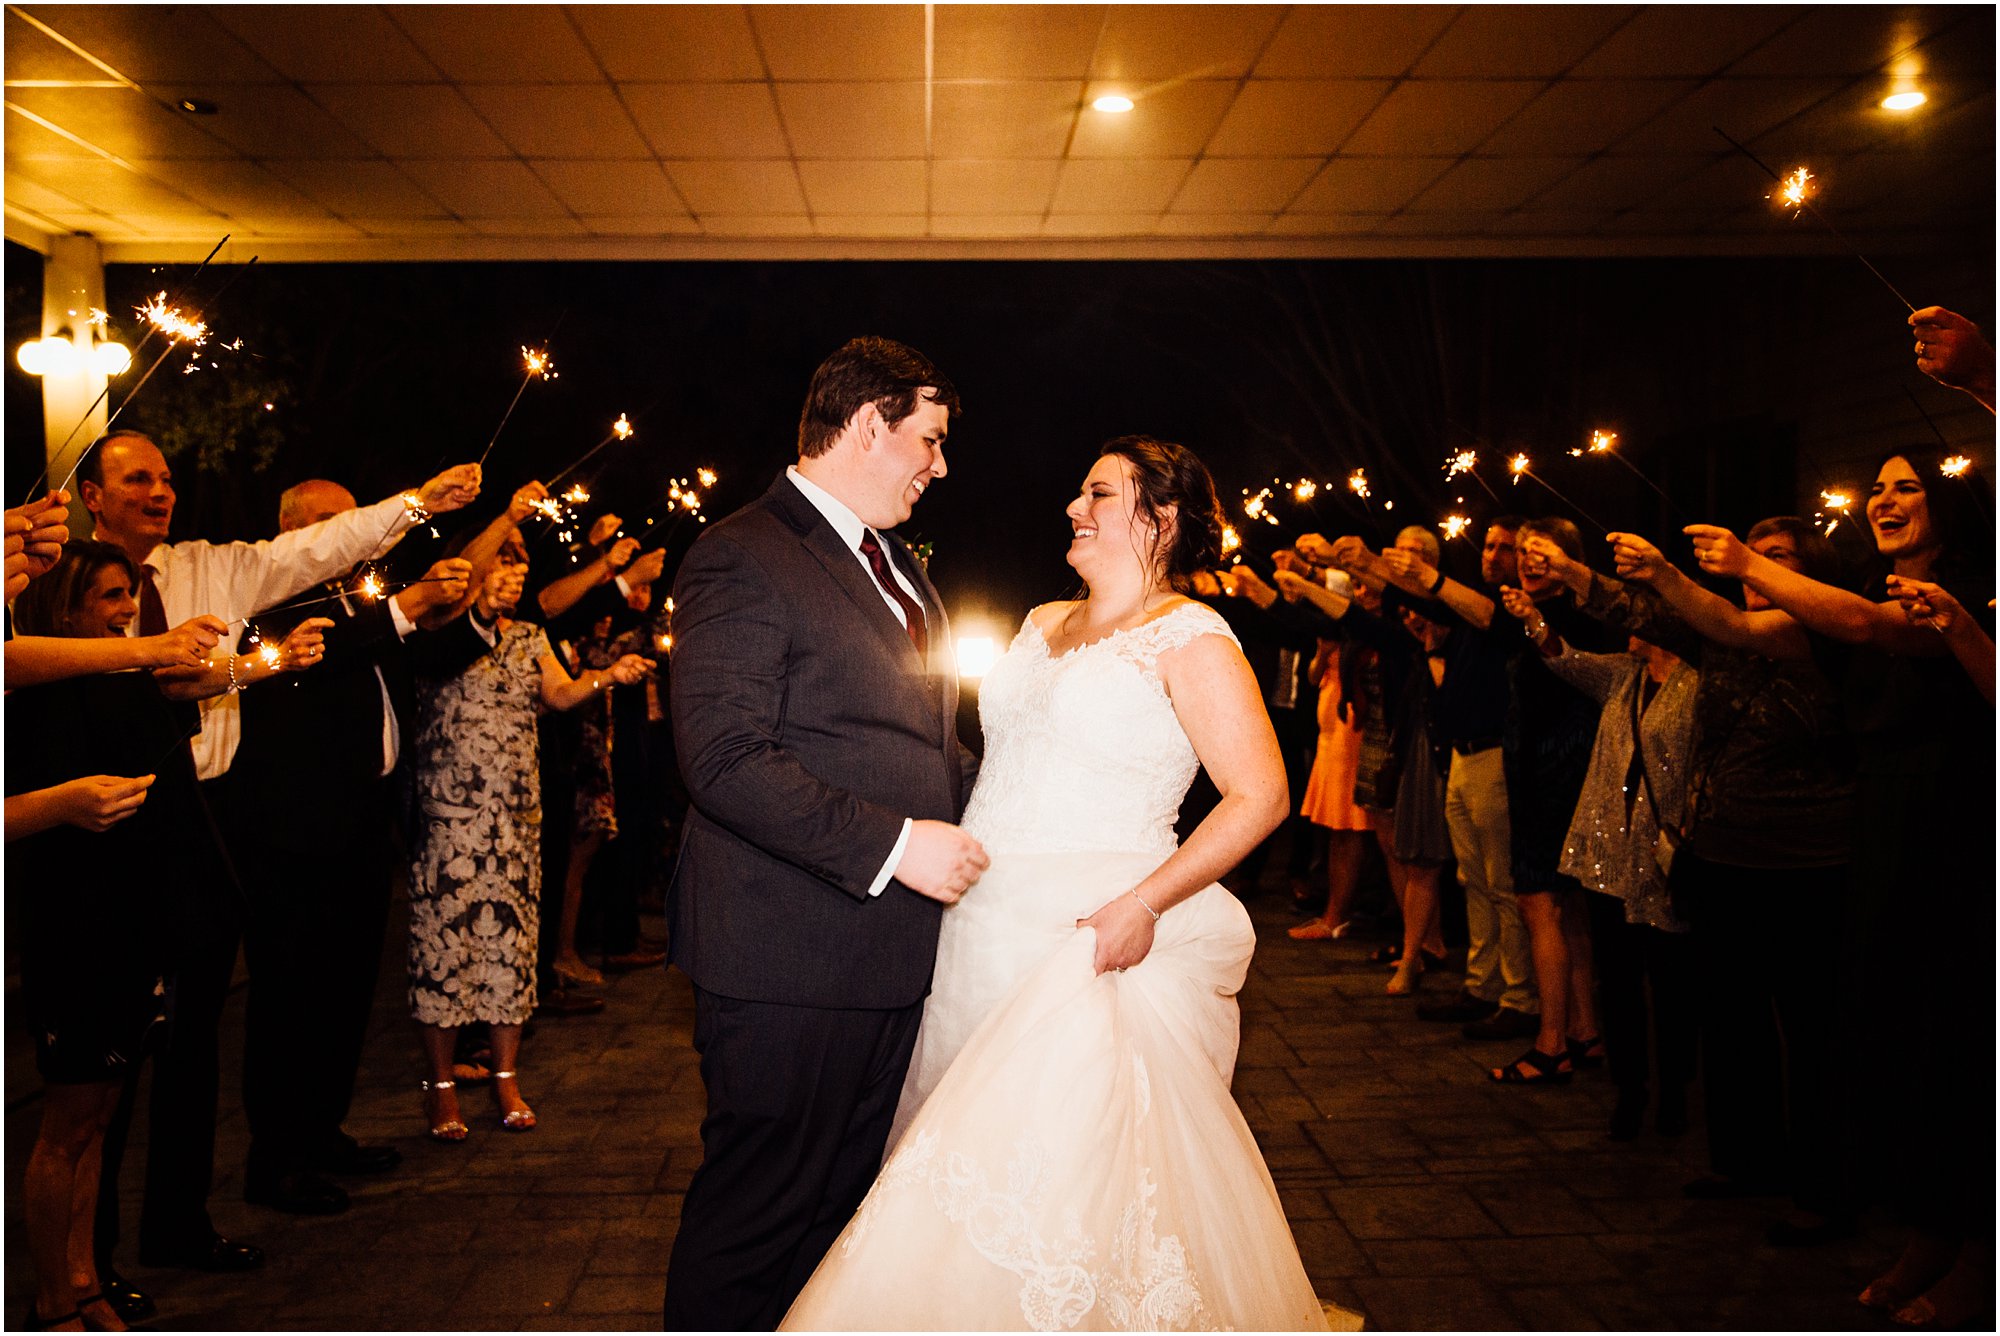 Bride and groom embracing with sparklers and guests behind them